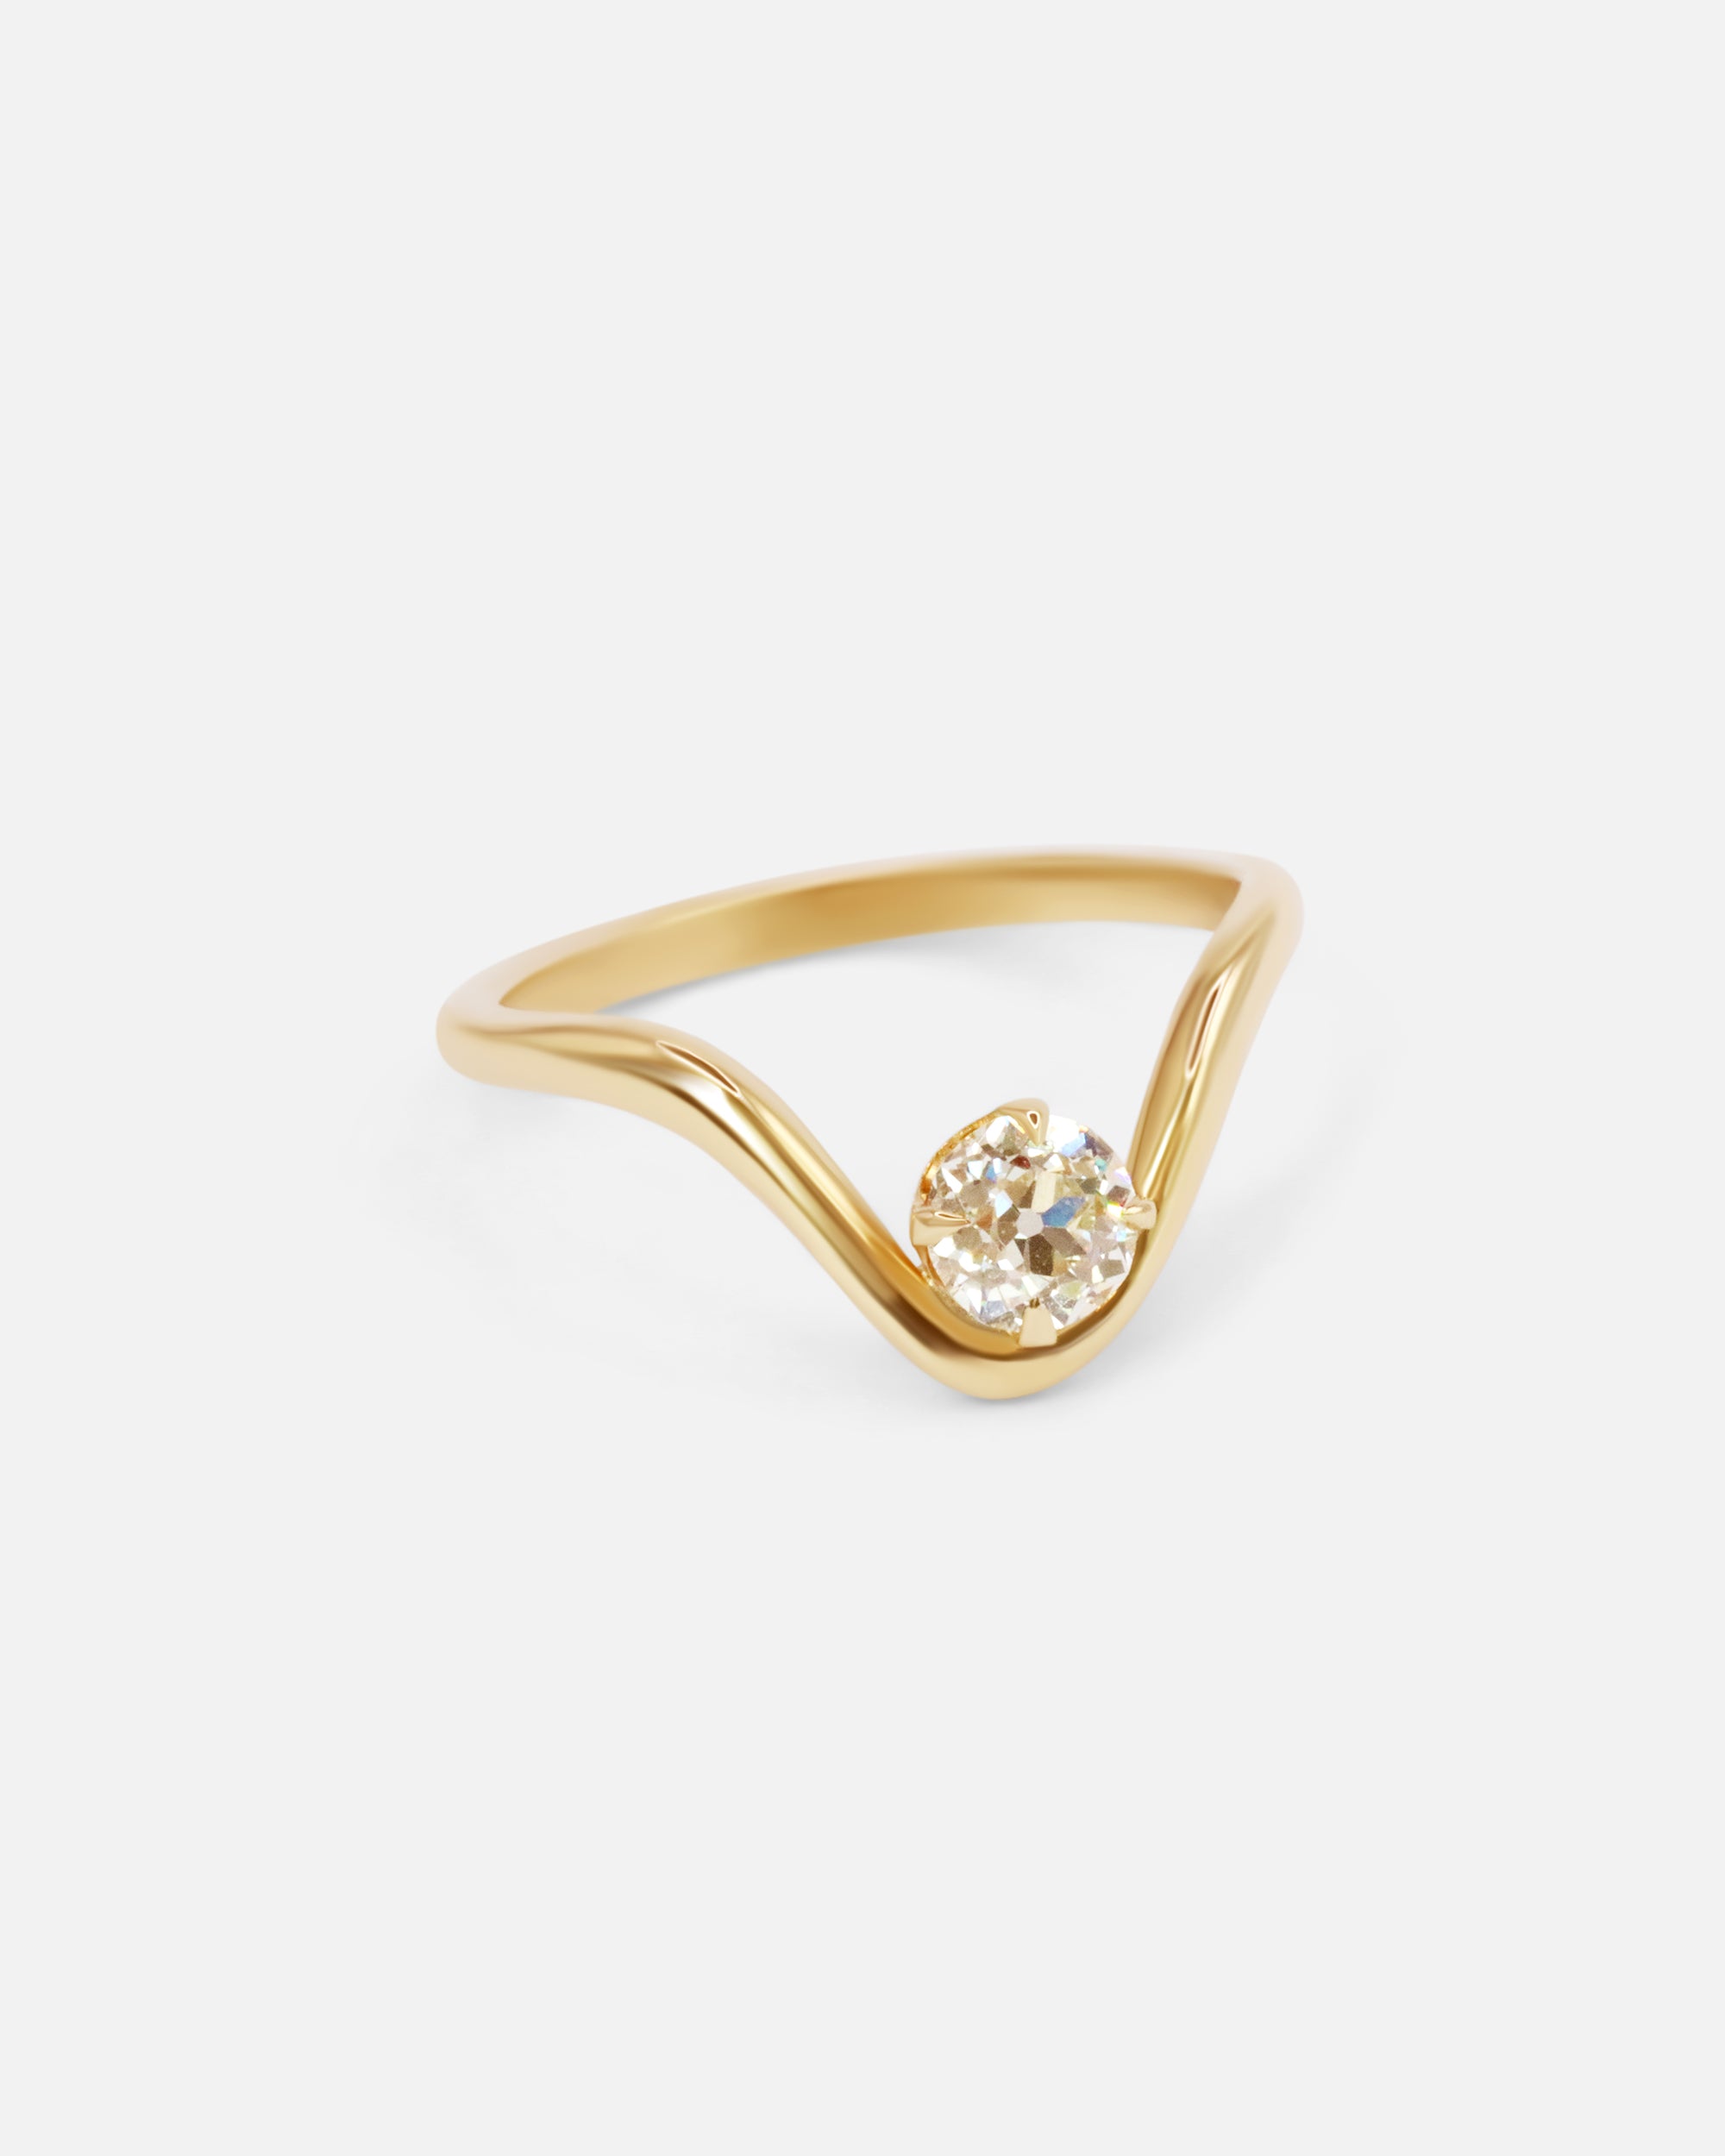 Diamond and Gold Curved Ring By Nishi